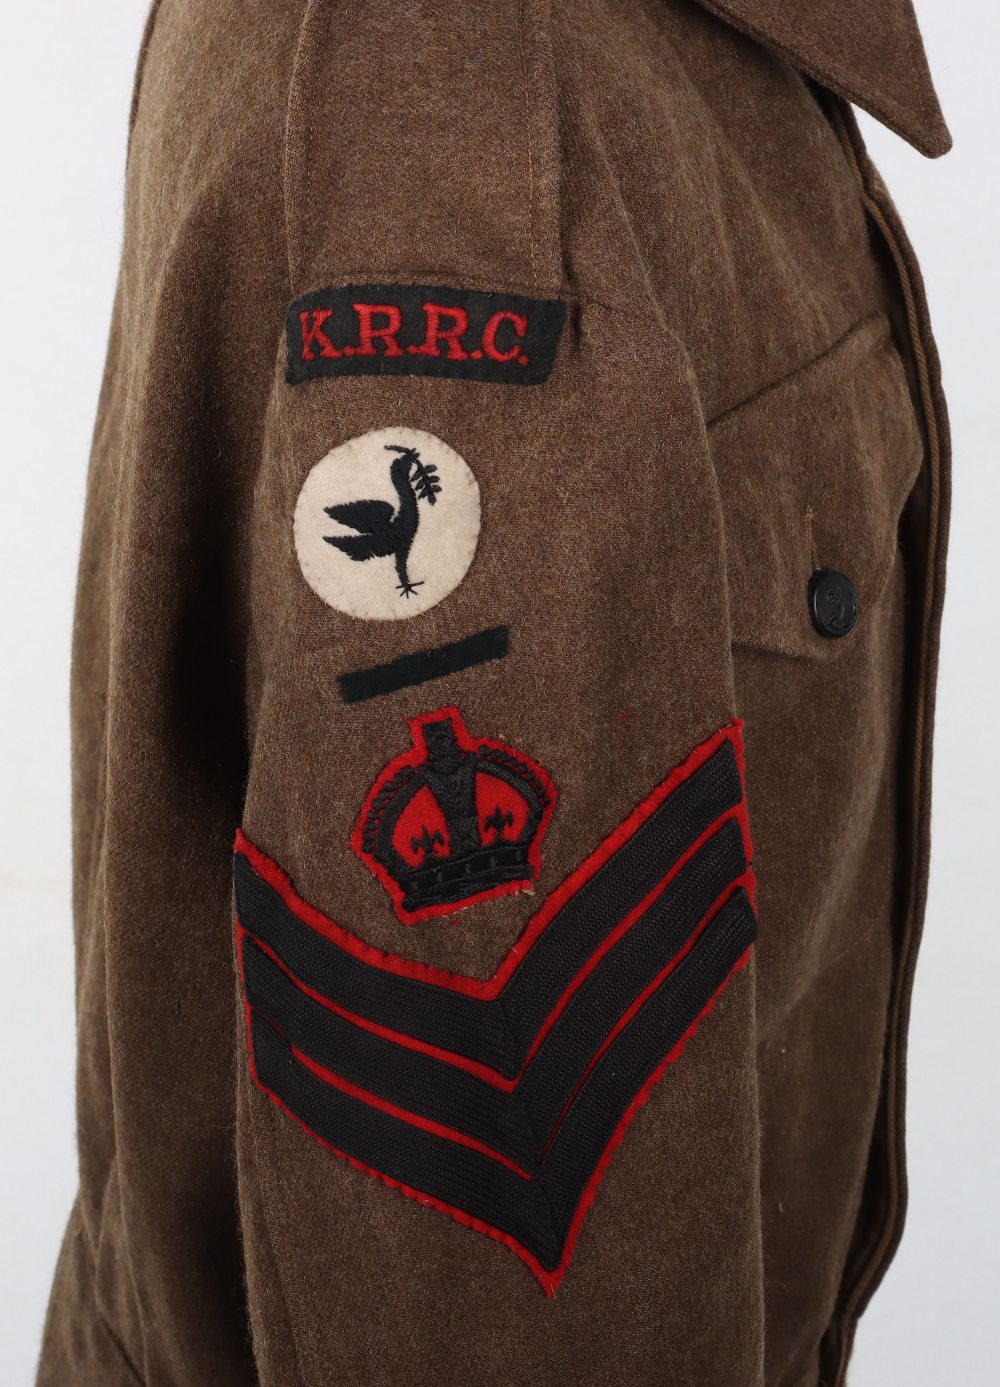 WW2 Kings Royal Rifle Corps 23rd Armoured Brigade Colour Sergeants Battle Dress Blouse - Image 5 of 14